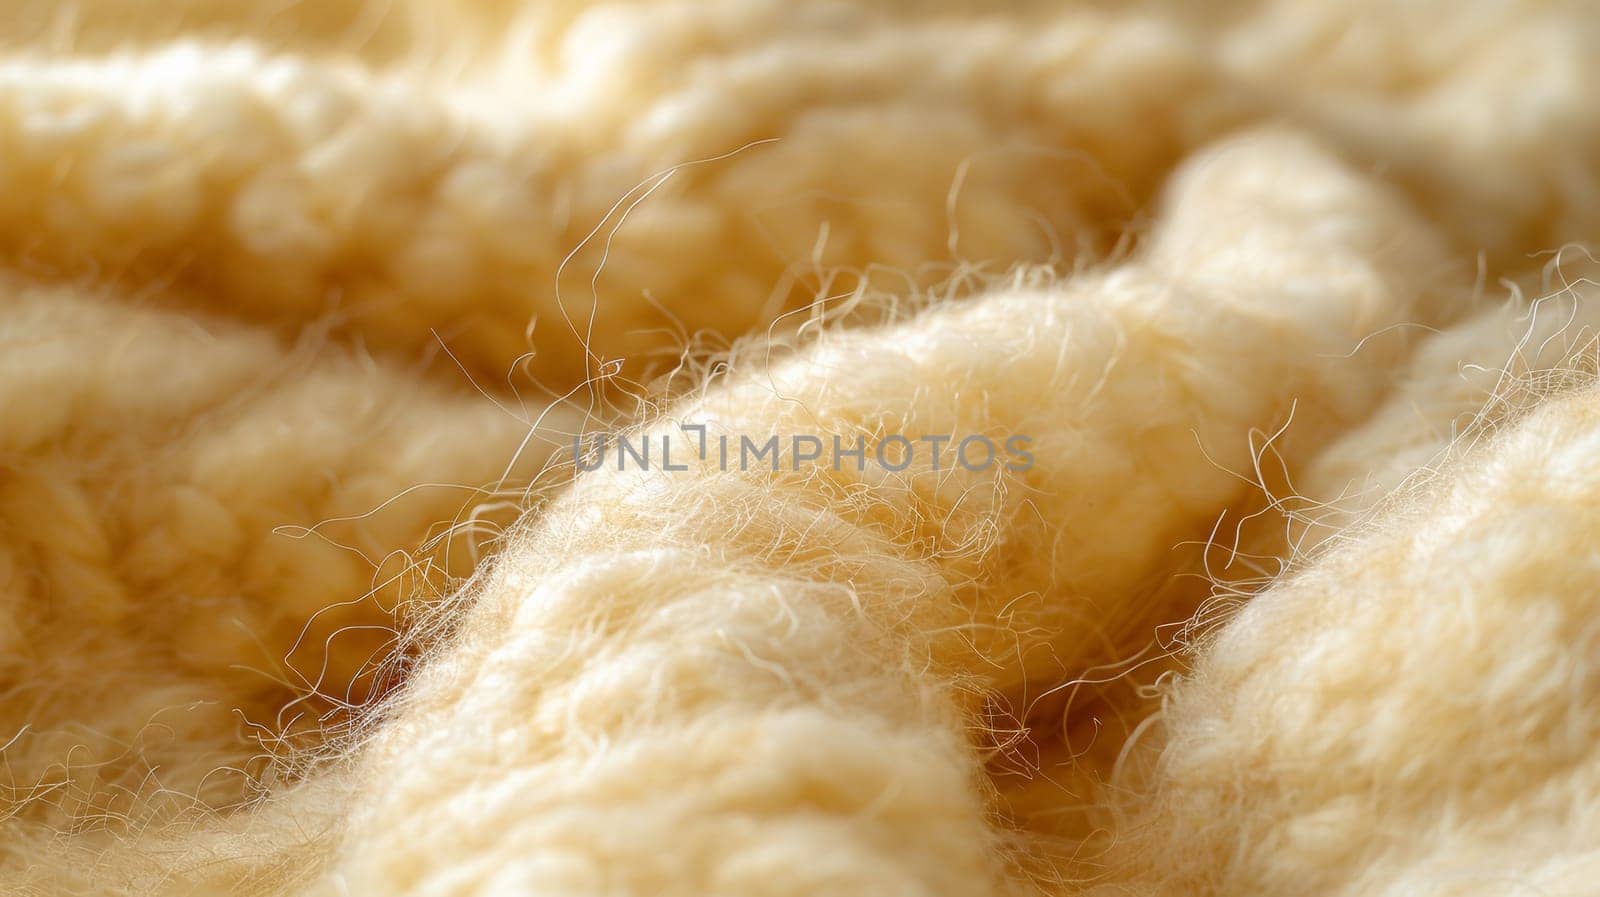 A close up of a pile of fluffy white fur